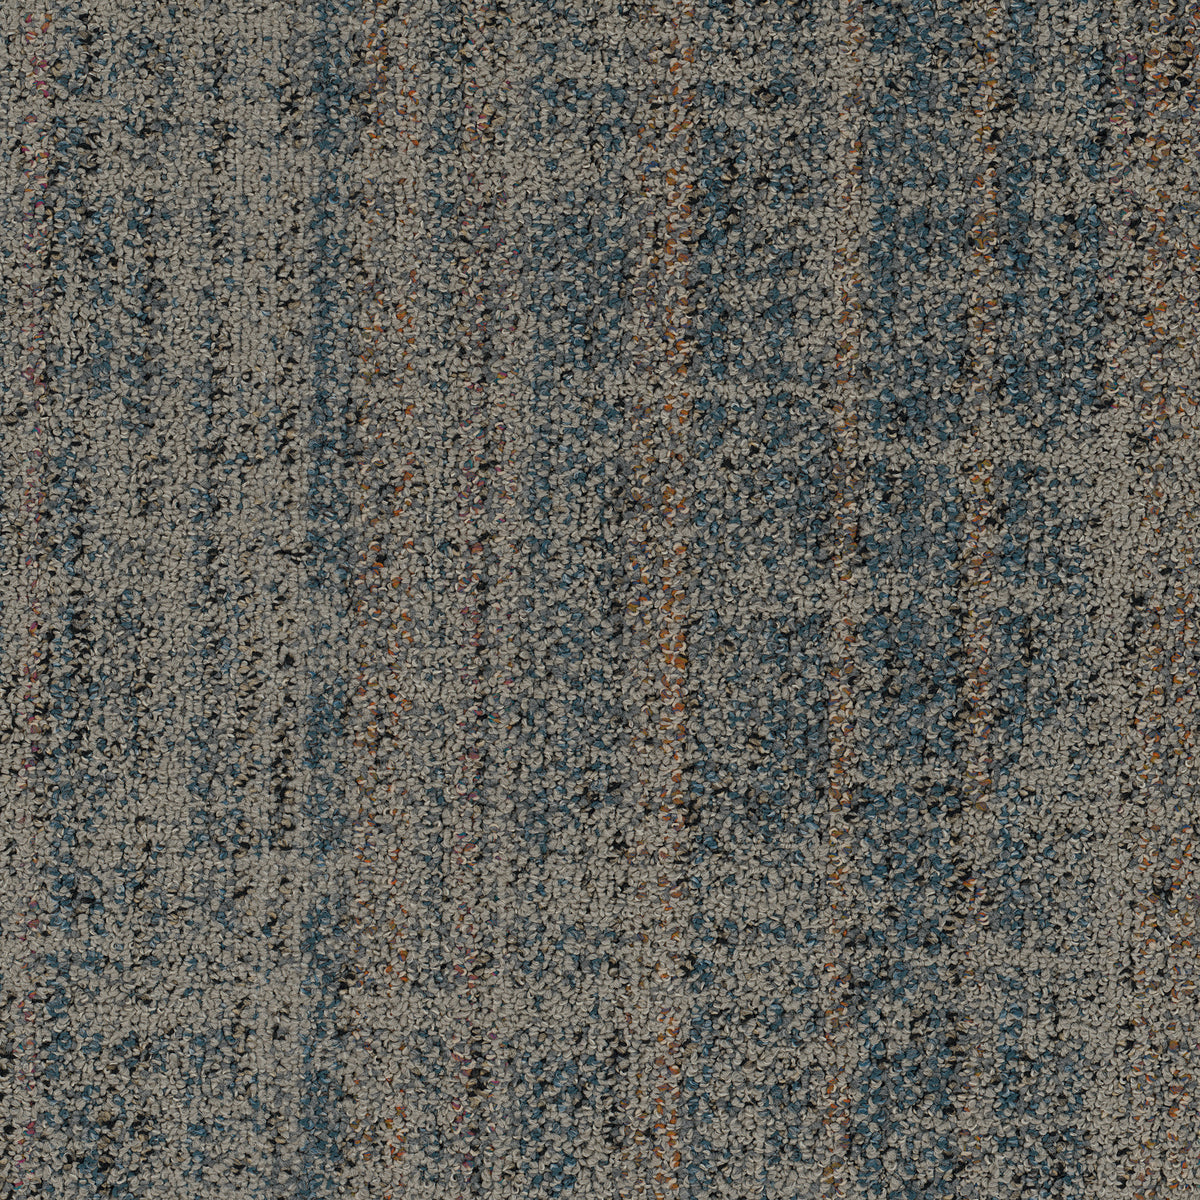 Mohawk Group - Wild Dyer Curious Cluster Commercial Carpet Tile - Golden Afternoon 828